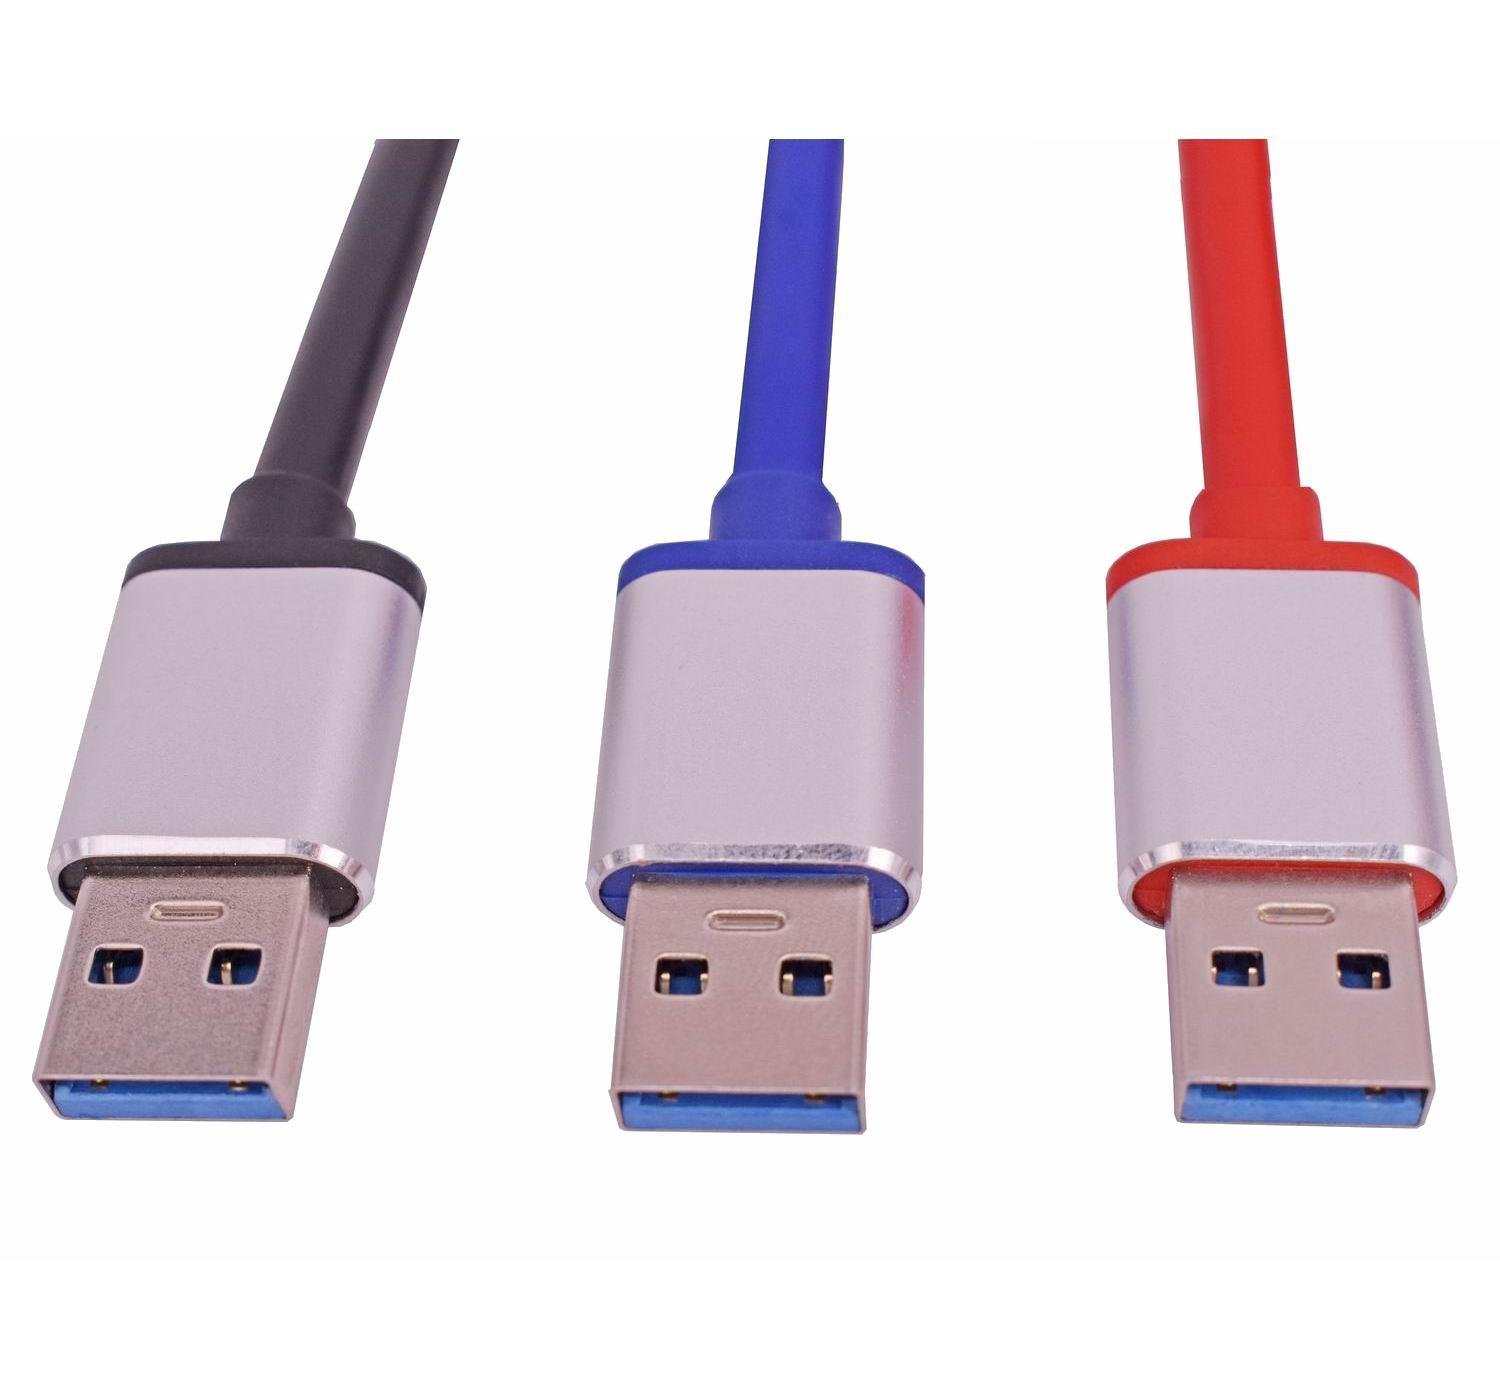 USB3.0 high quality supper speed data cable 4